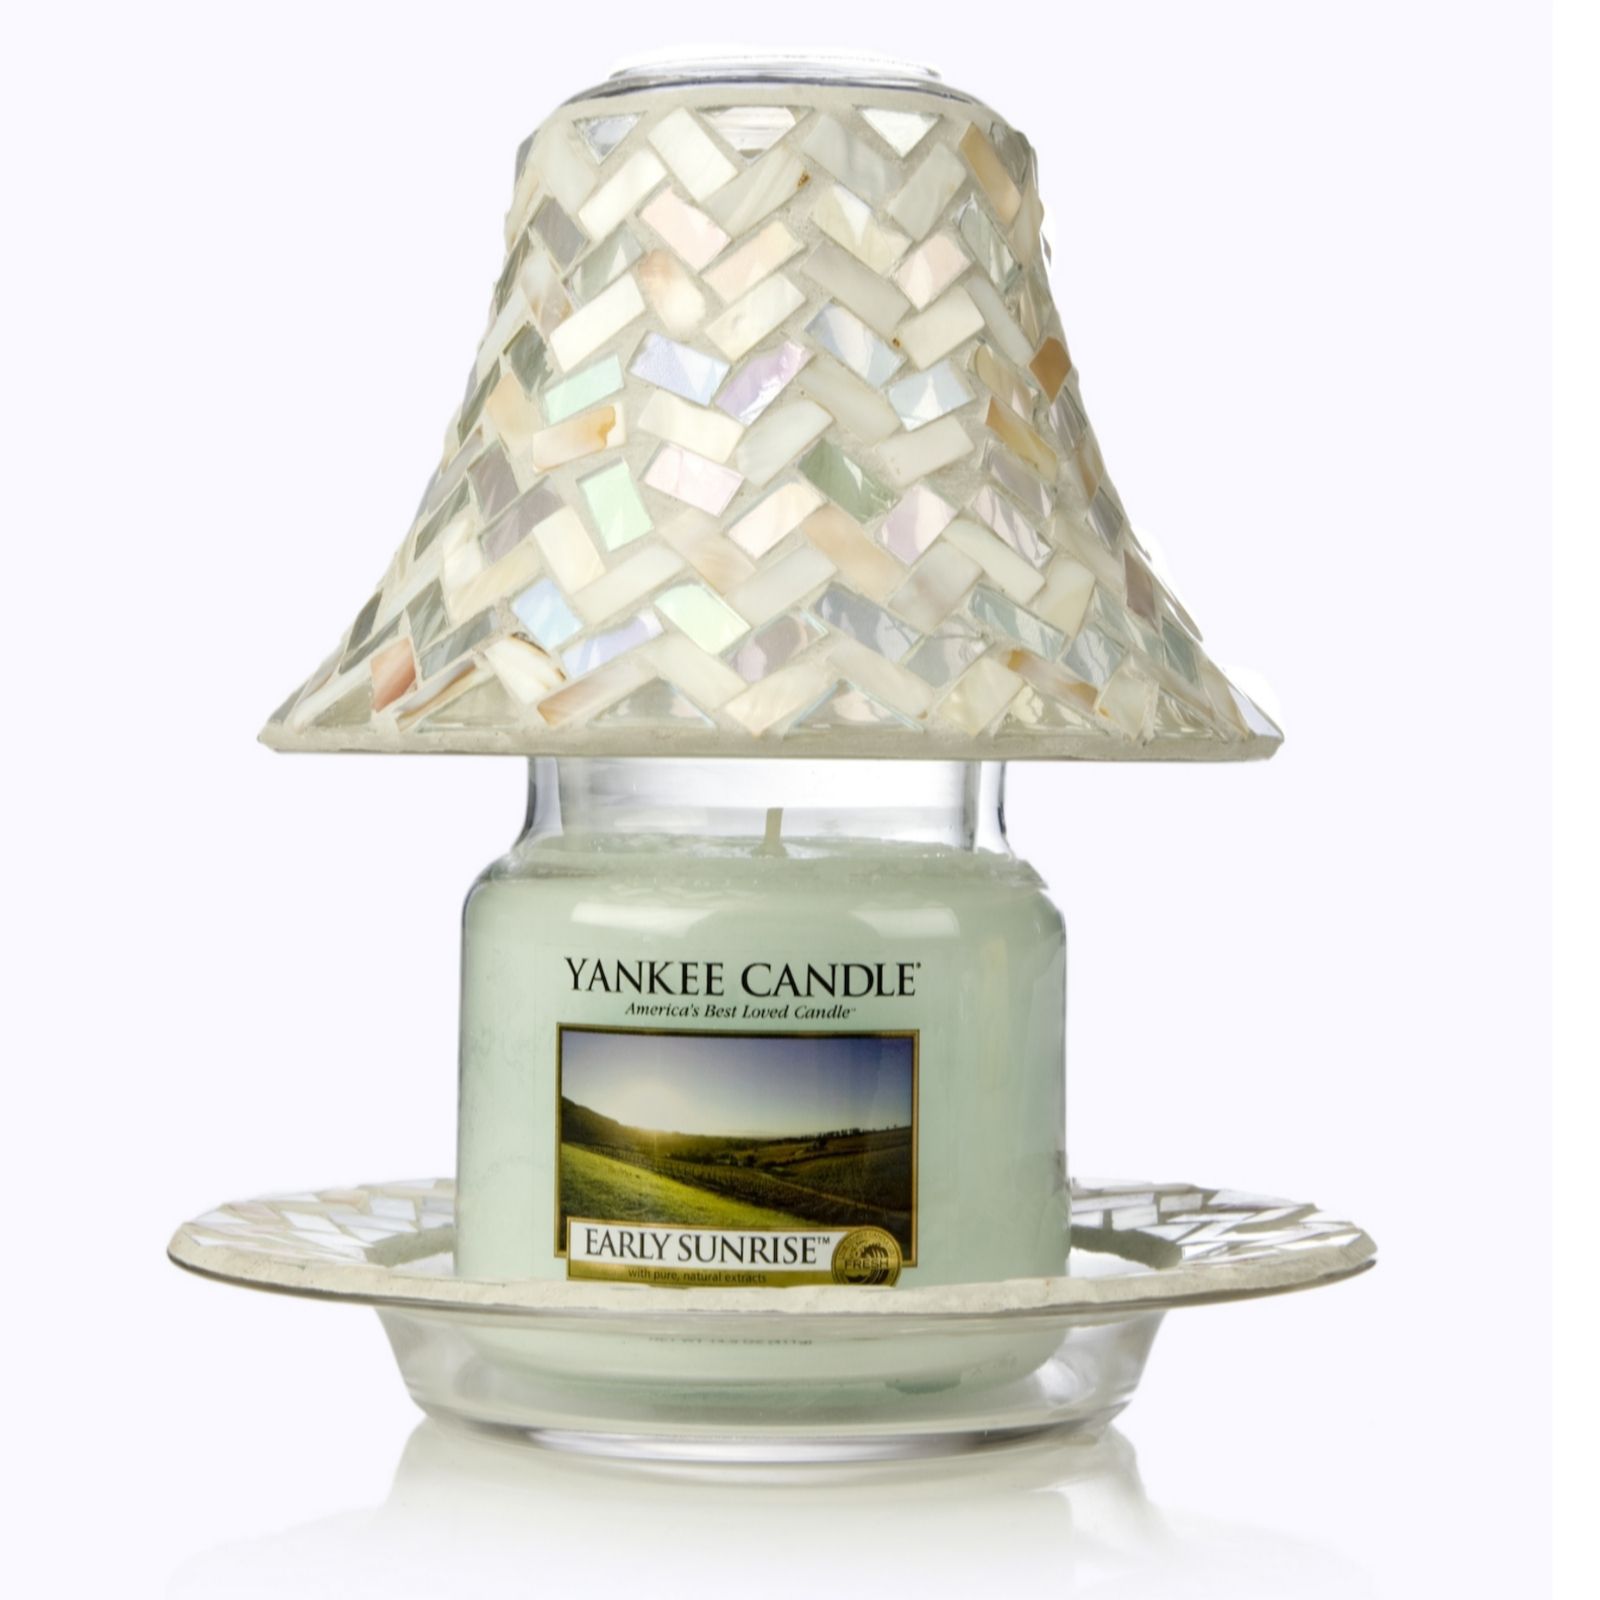 Yankee Candle Reflection Shade & Plate with Medium Jar Candle - QVC UK